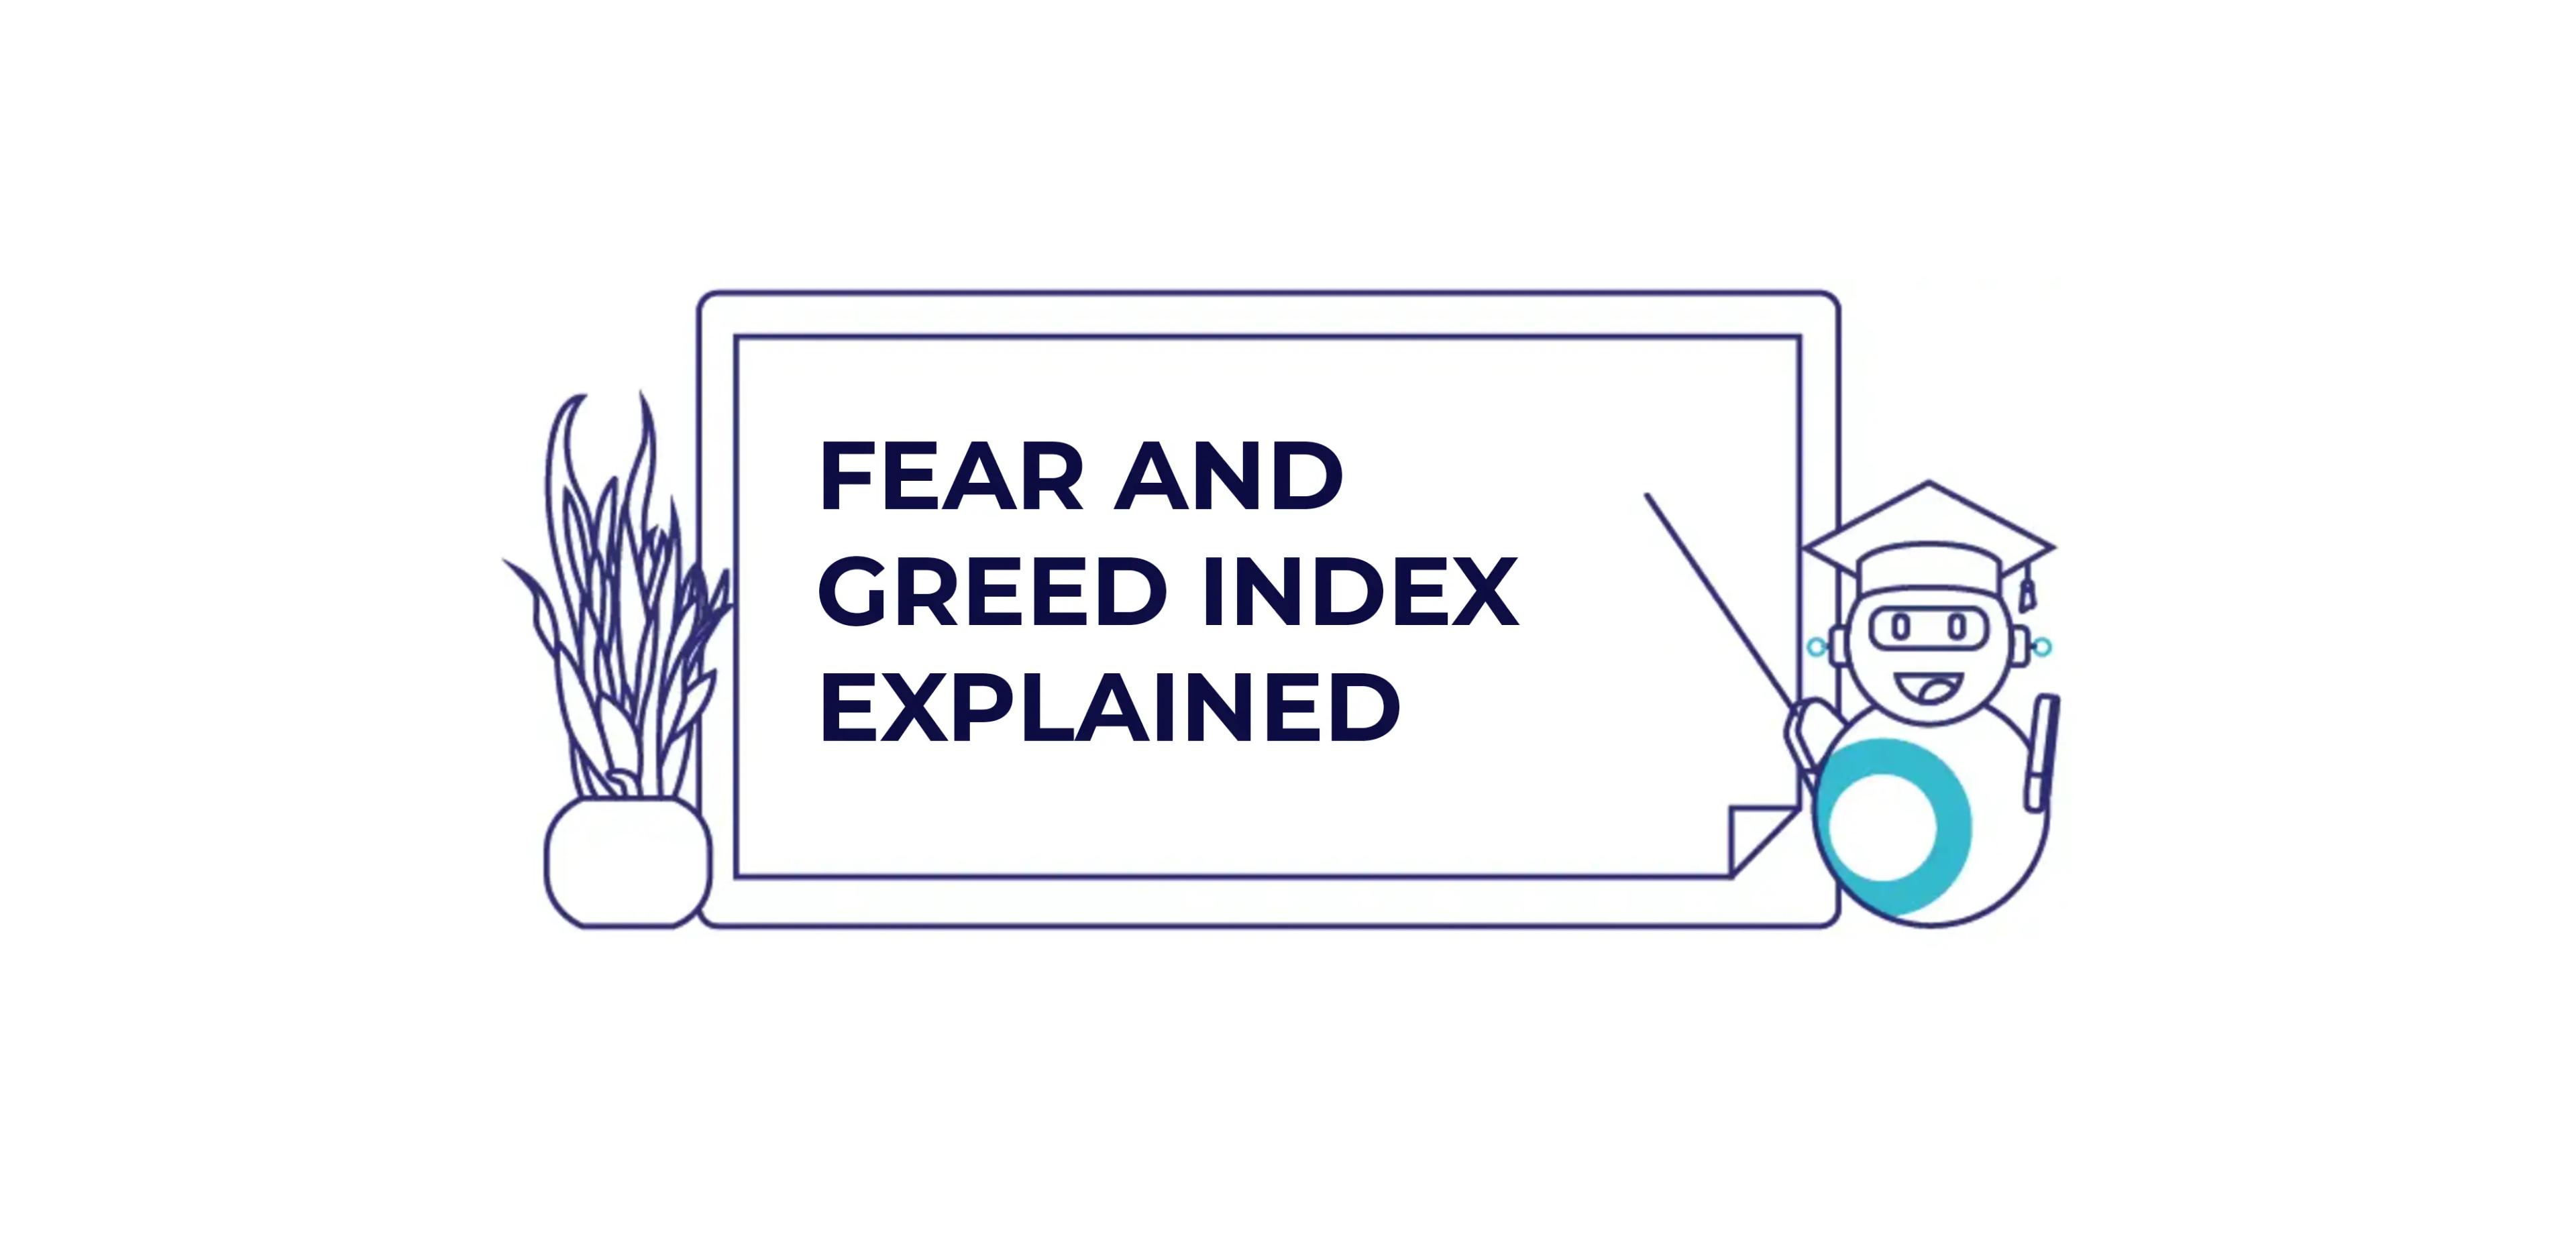 Crypto trading 101 - Fear and greed index explained